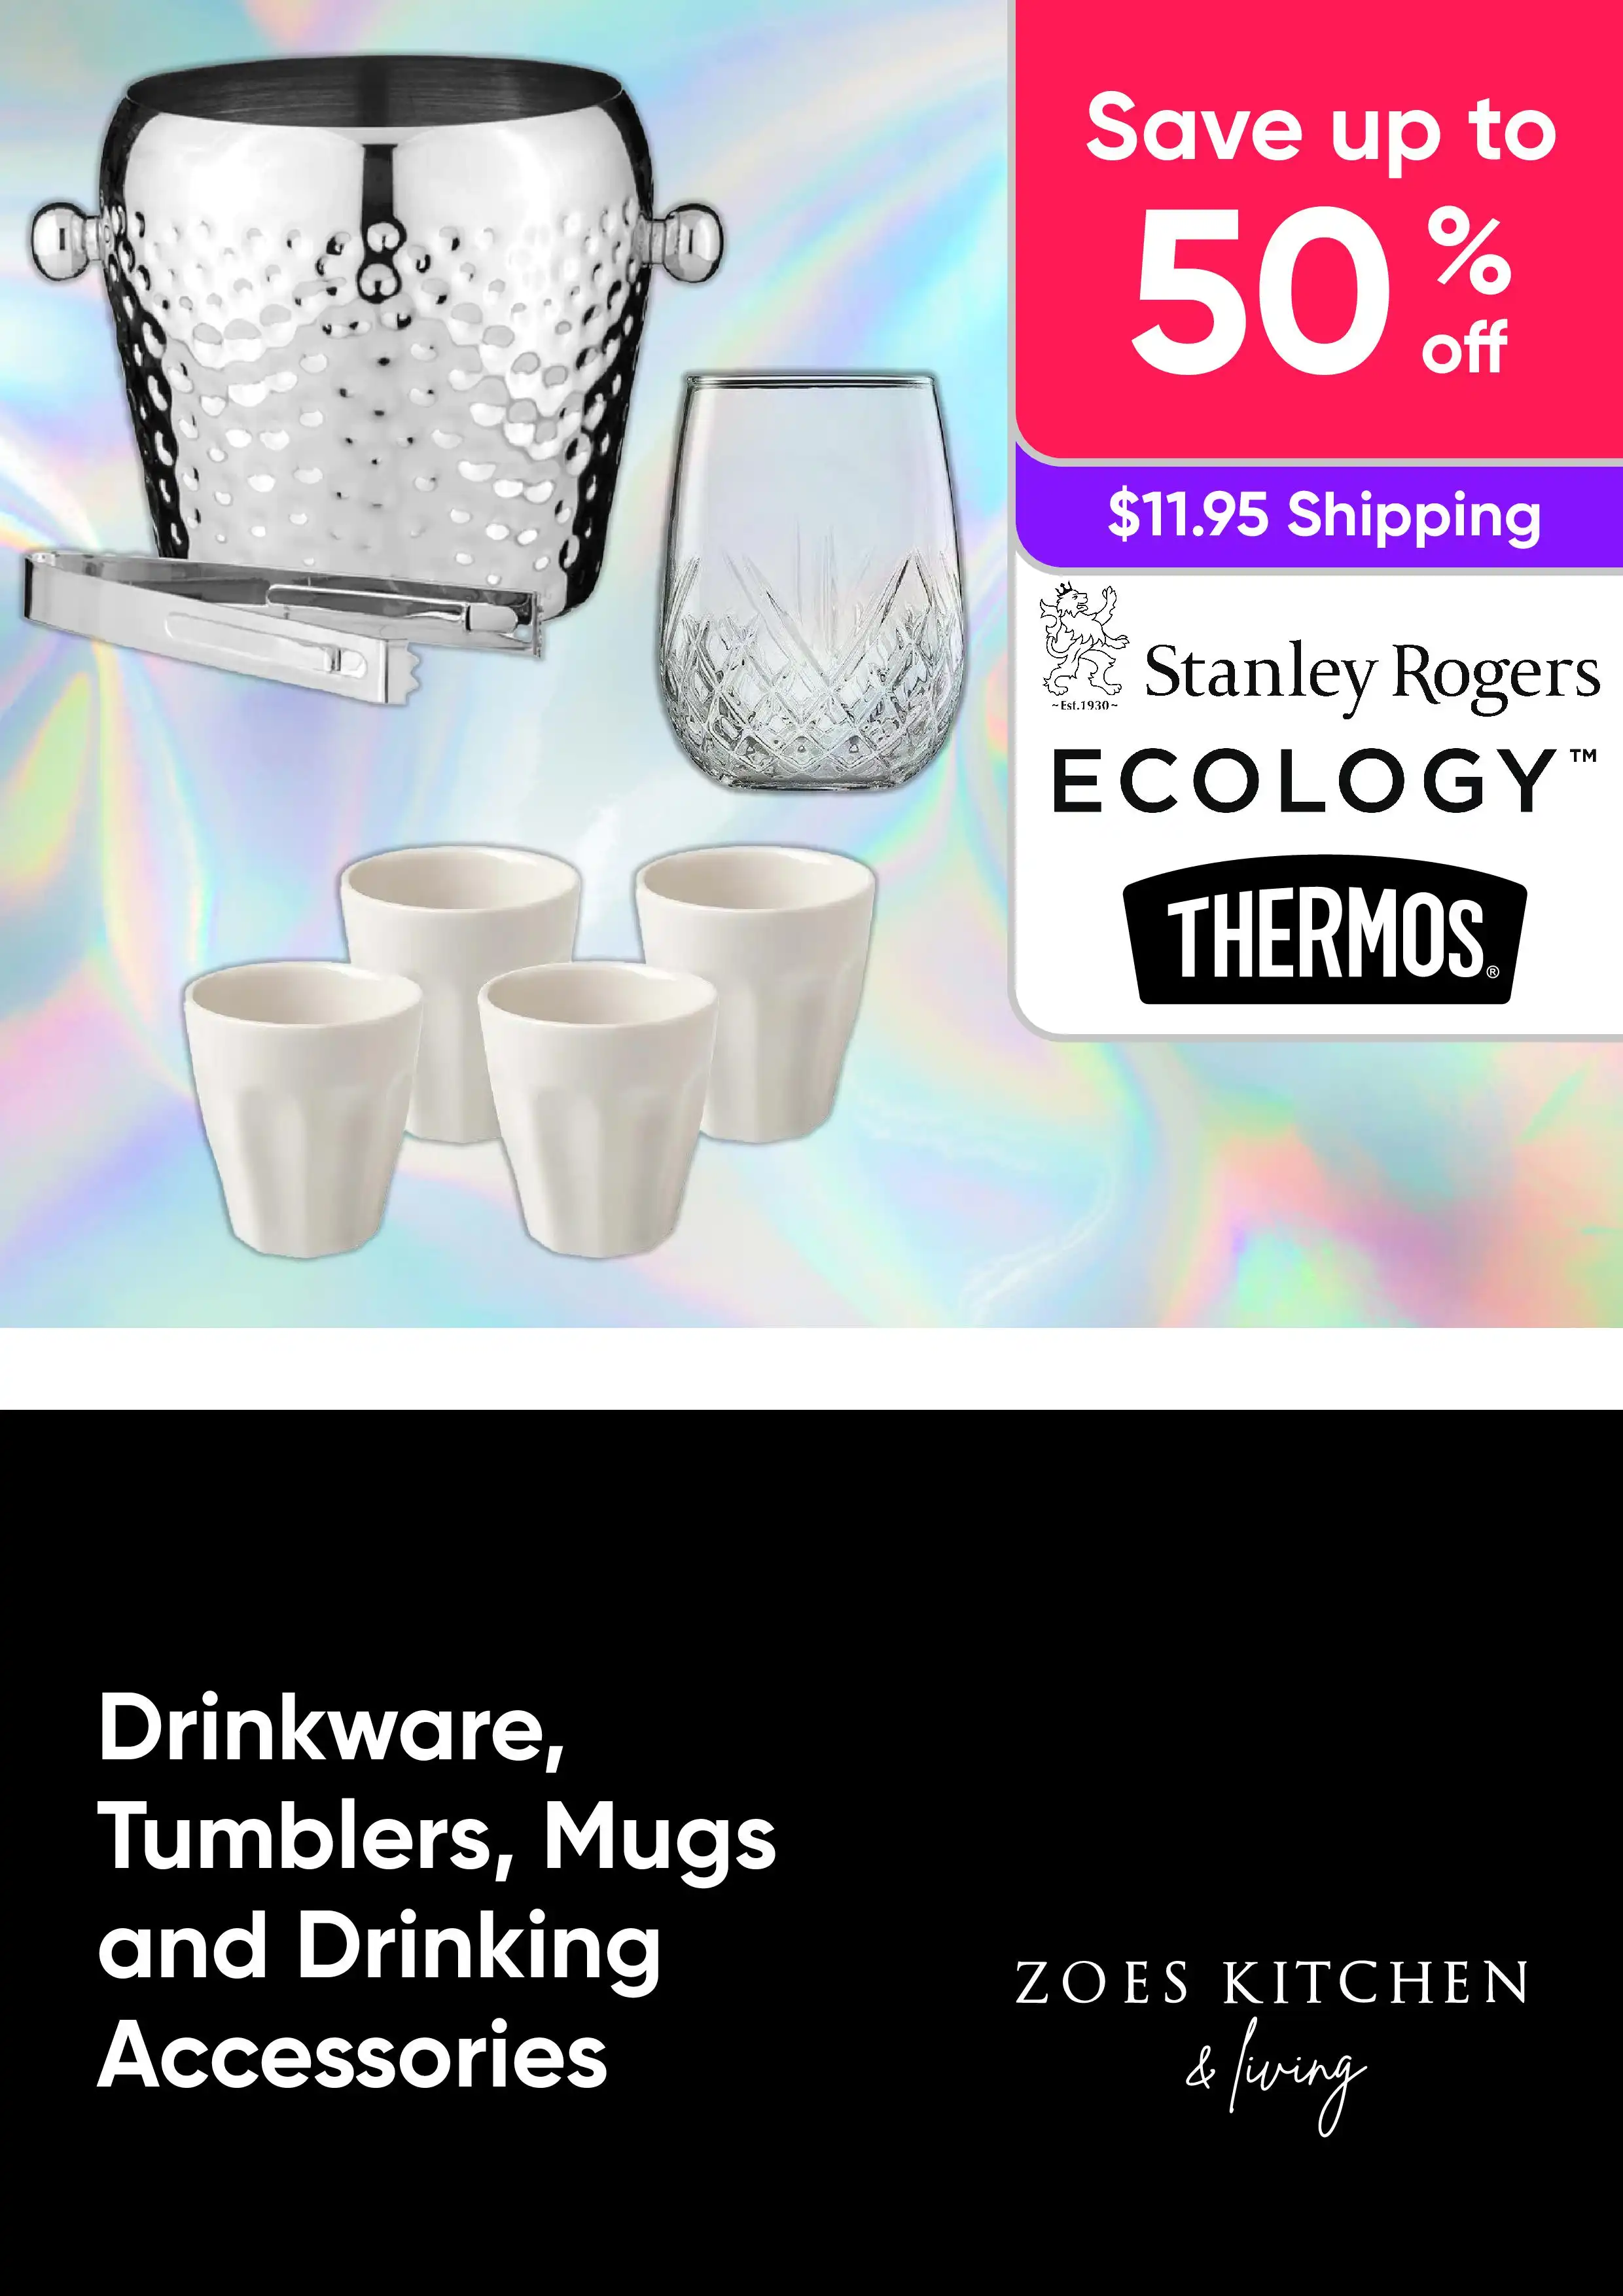 Shop and Save Up to 50% On Drinkware, Tumblers, Mugs and Drinking Accessories